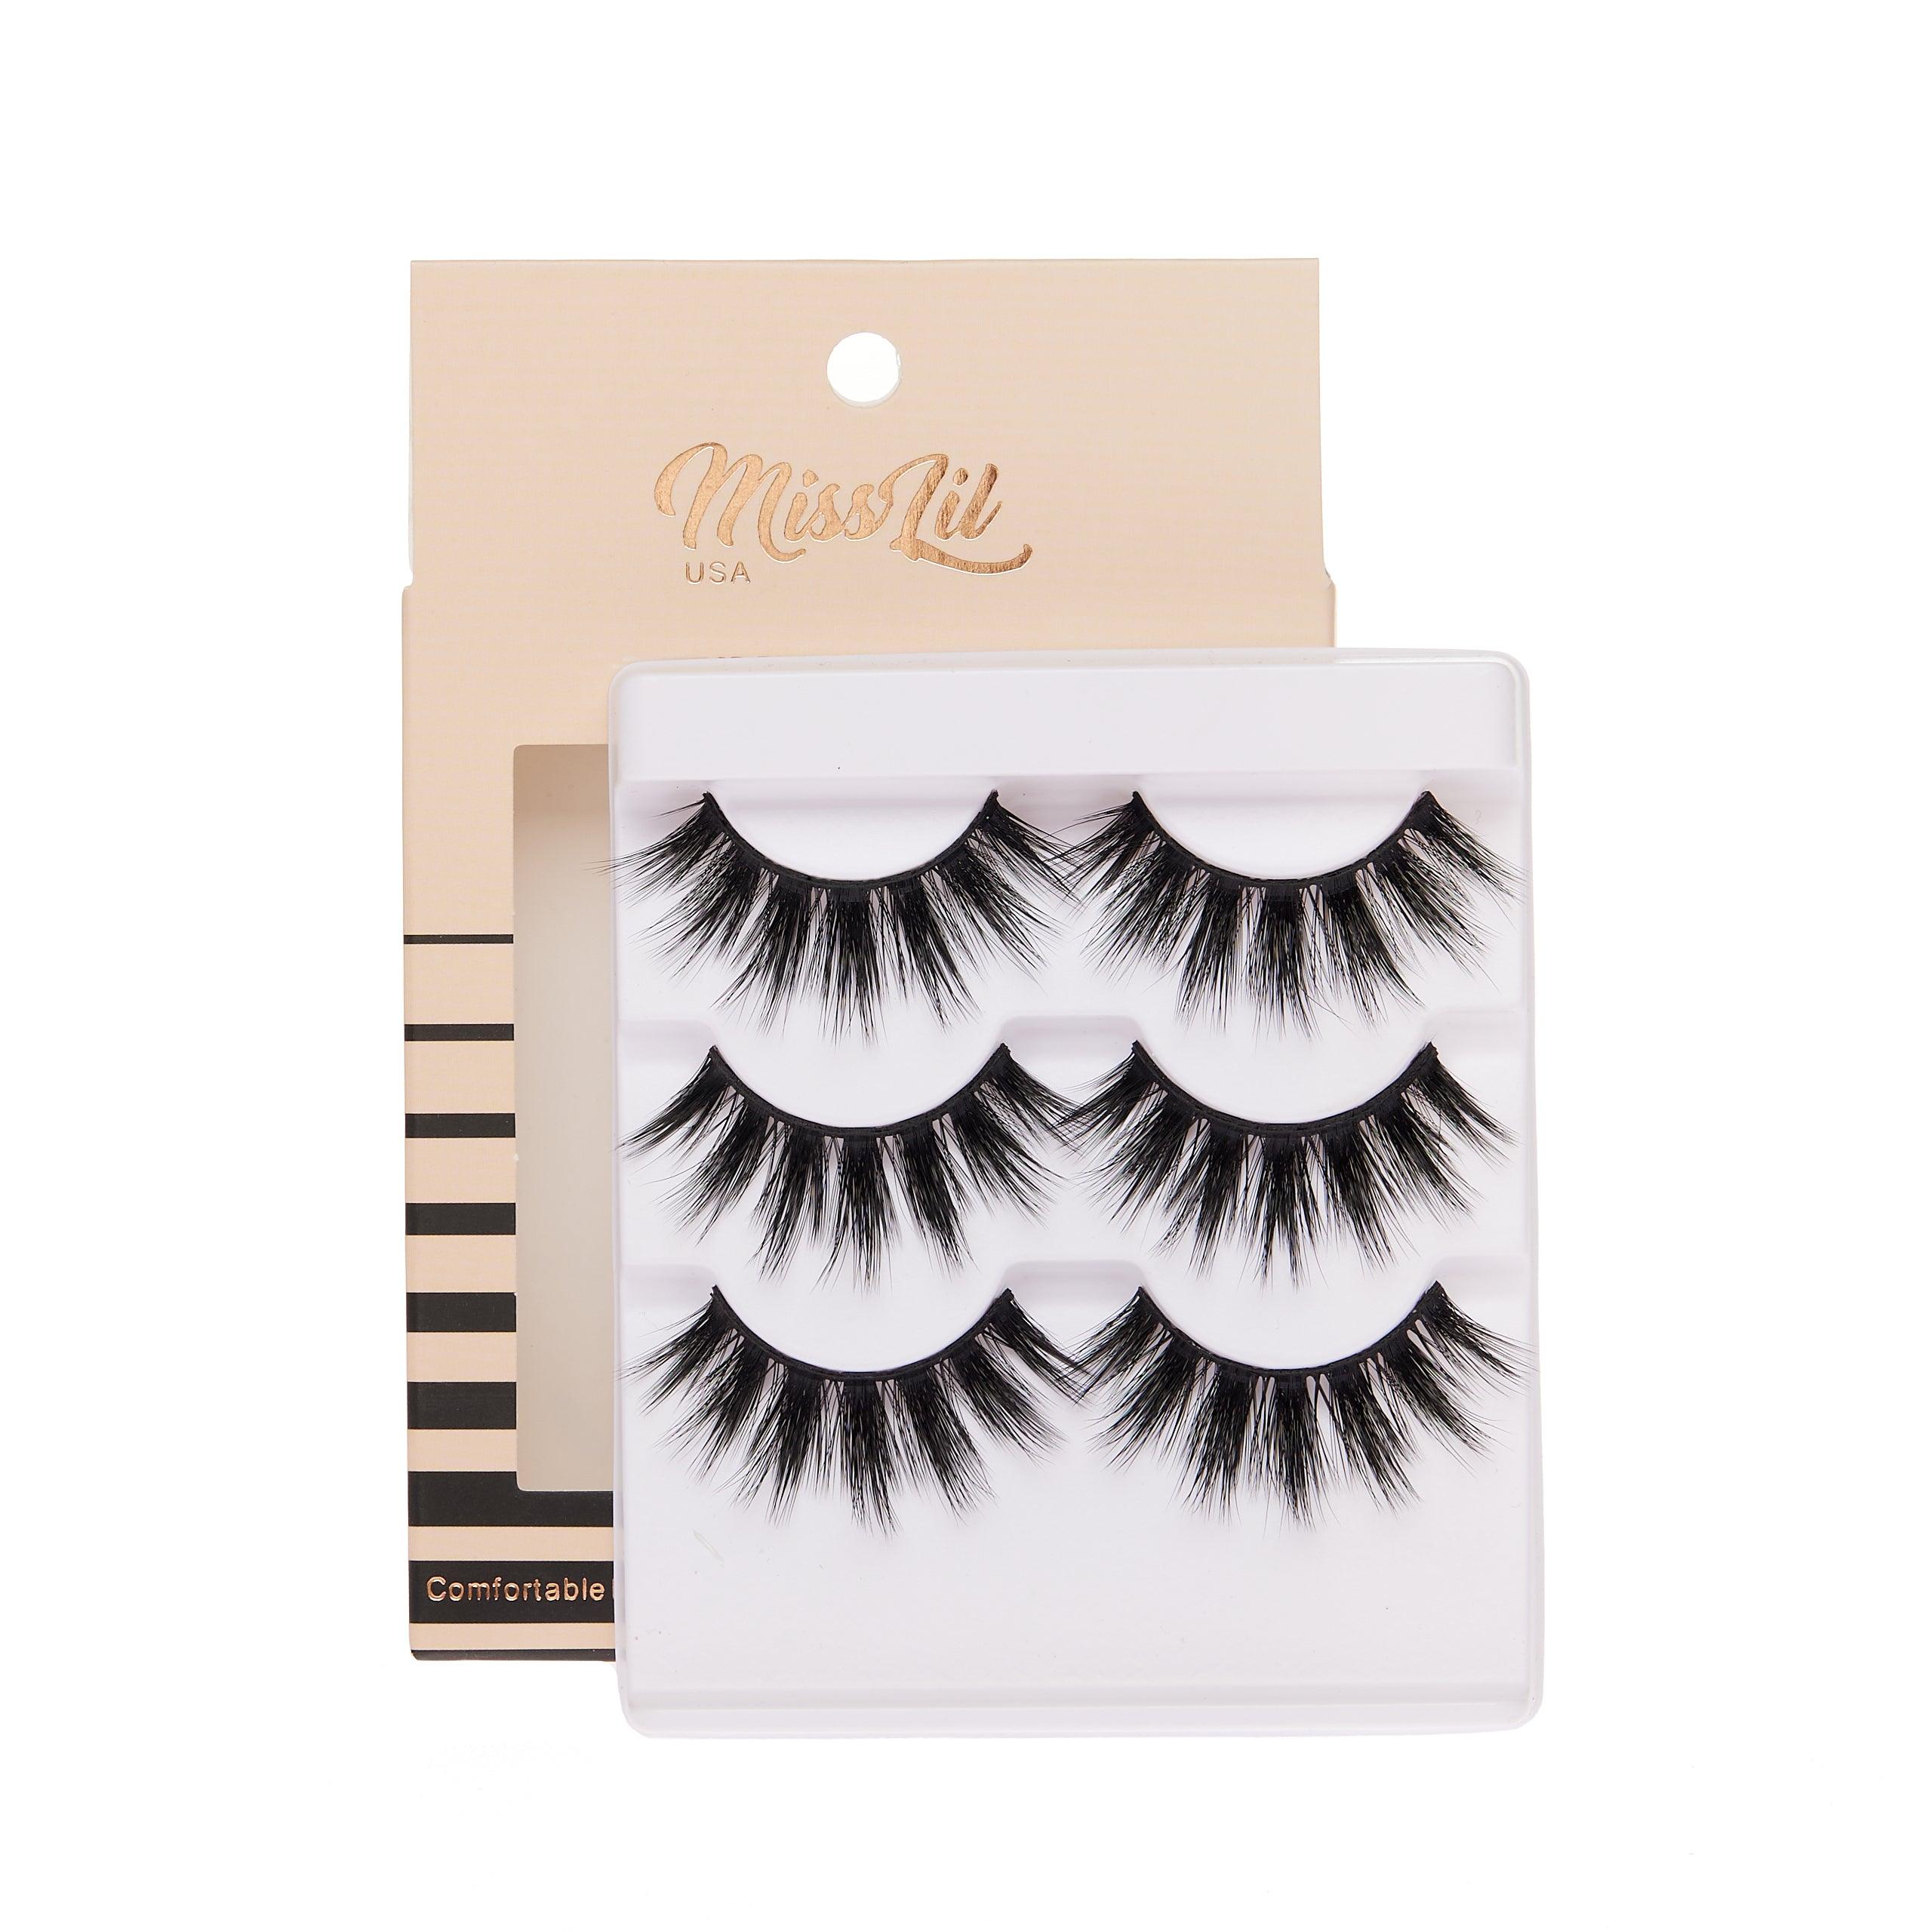 3-Pair Faux 9D Mink Eyelashes - Luxury Collection #9 - Pack of 3 - Miss Lil USA